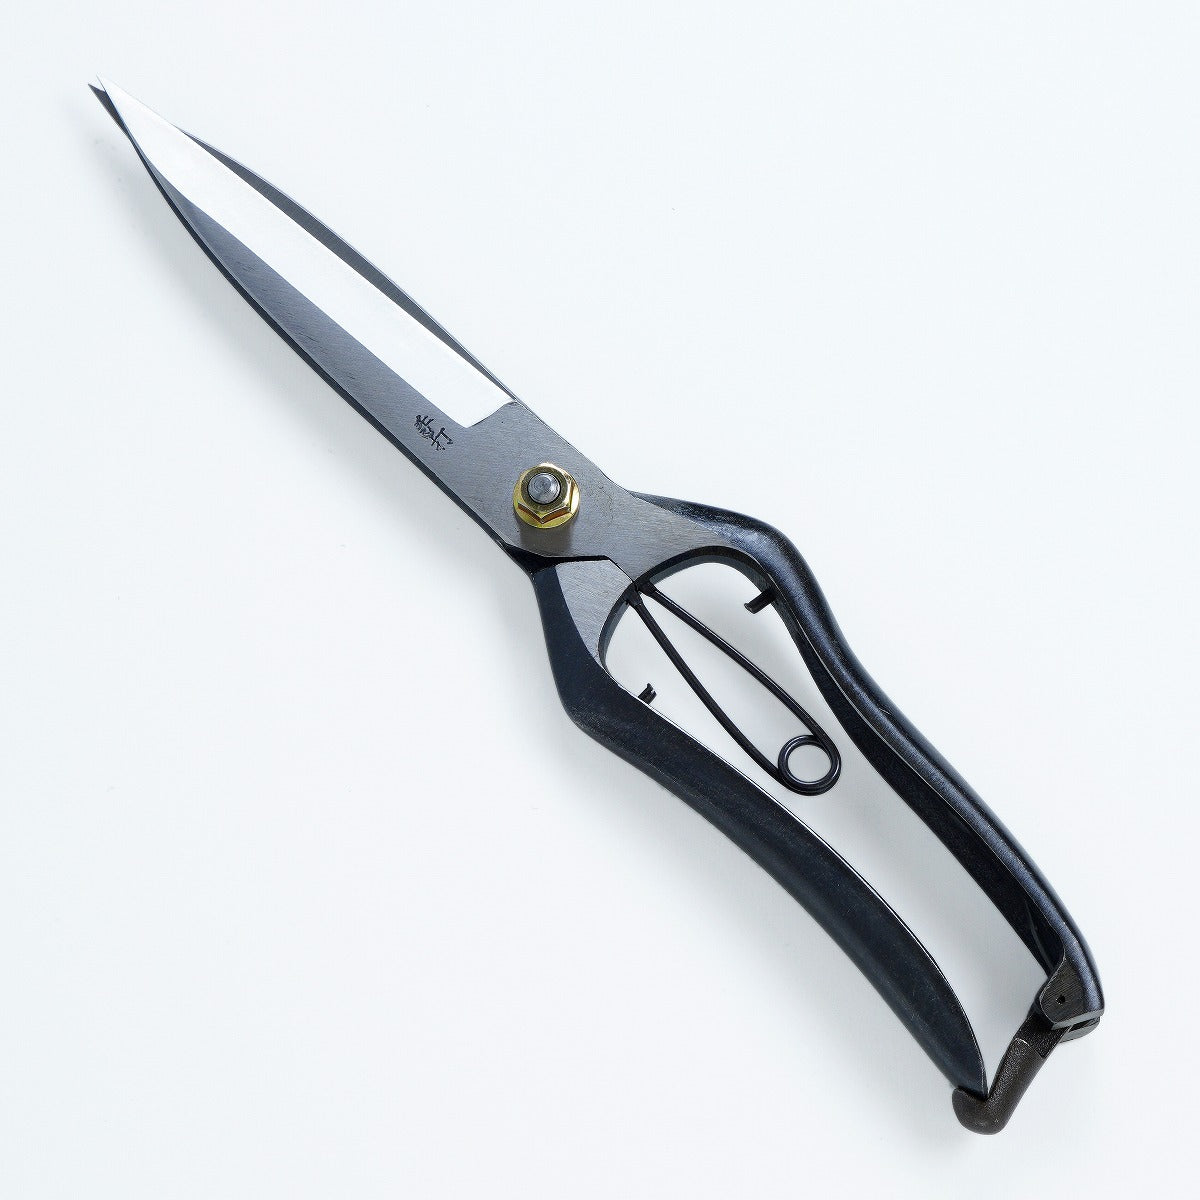 "HANAKUMAGAWA” One Hand Pruning Shears, Handle without Hand Guard, The Whole Length : 270mm(abt 10.6") Standard Size